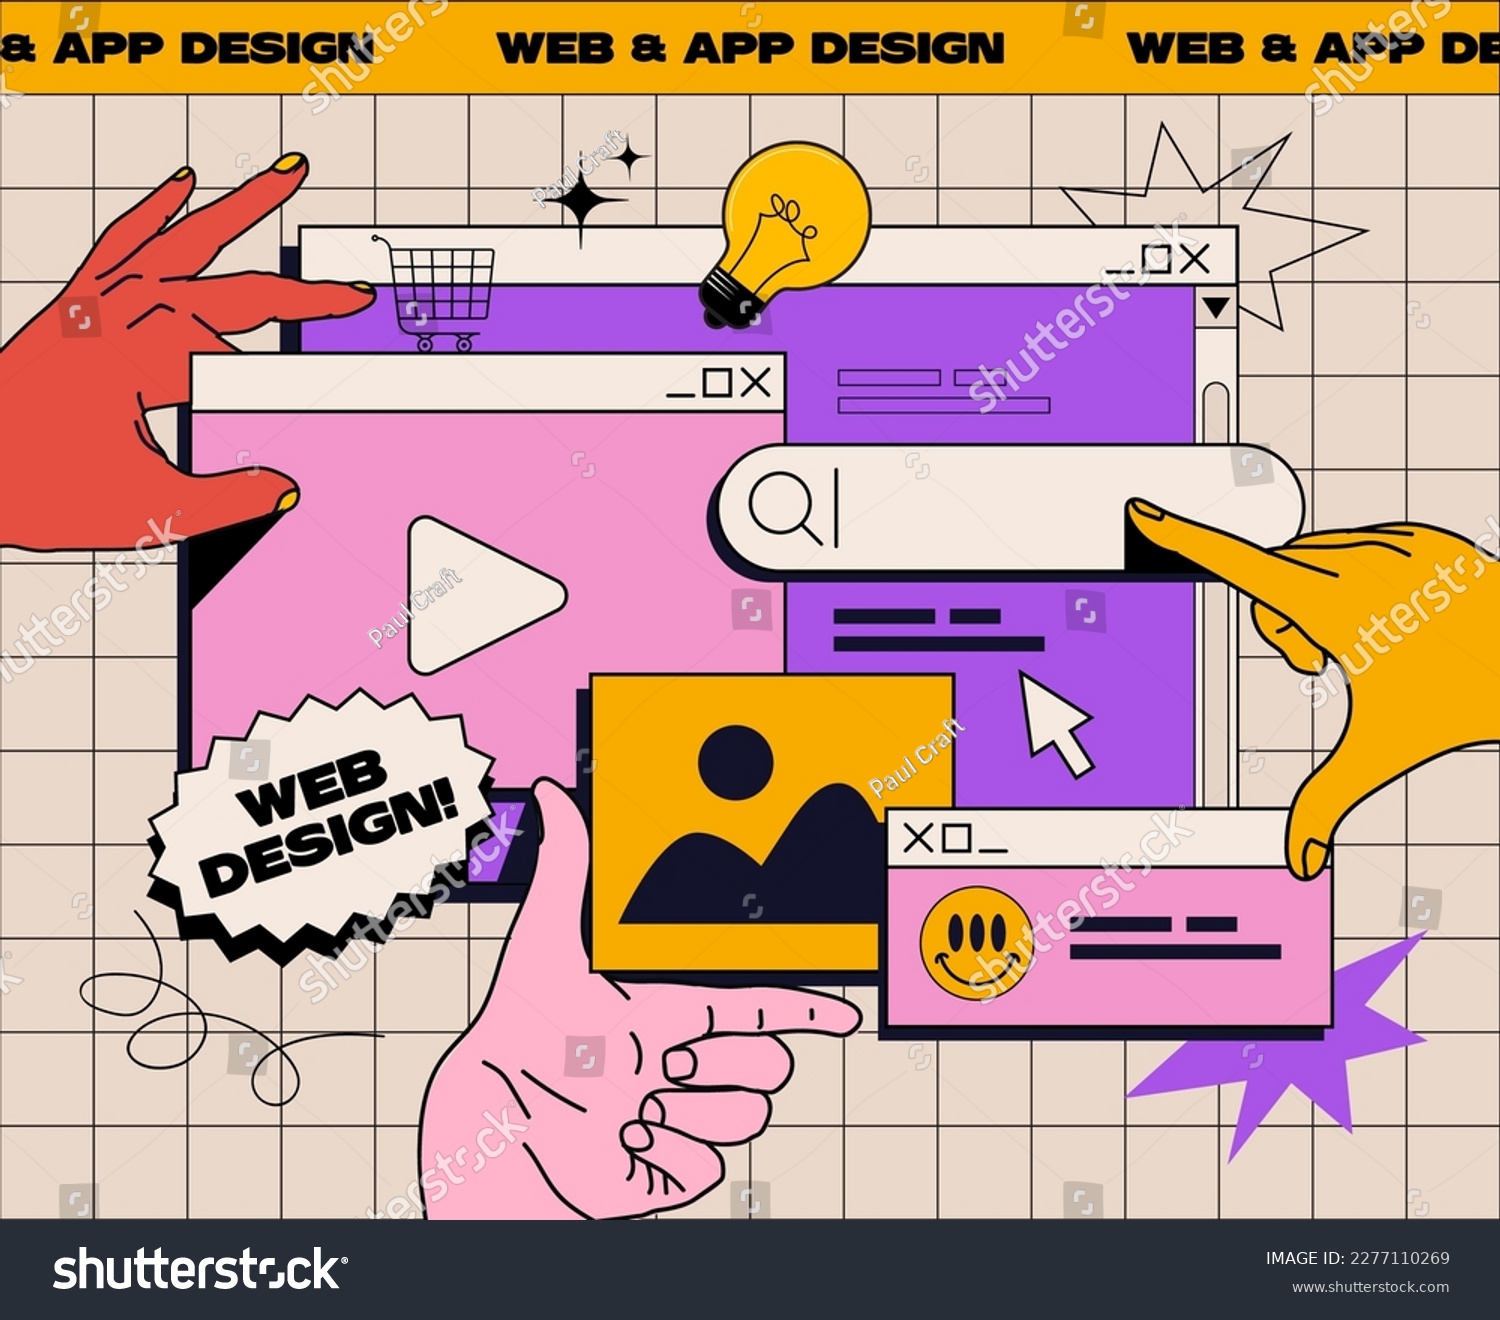 SVG of Website or APP design banner concept advertisement in retro style with hands working on ui ux design or mobile application. Studio or agency prototyping or coding web page or mobile app. svg